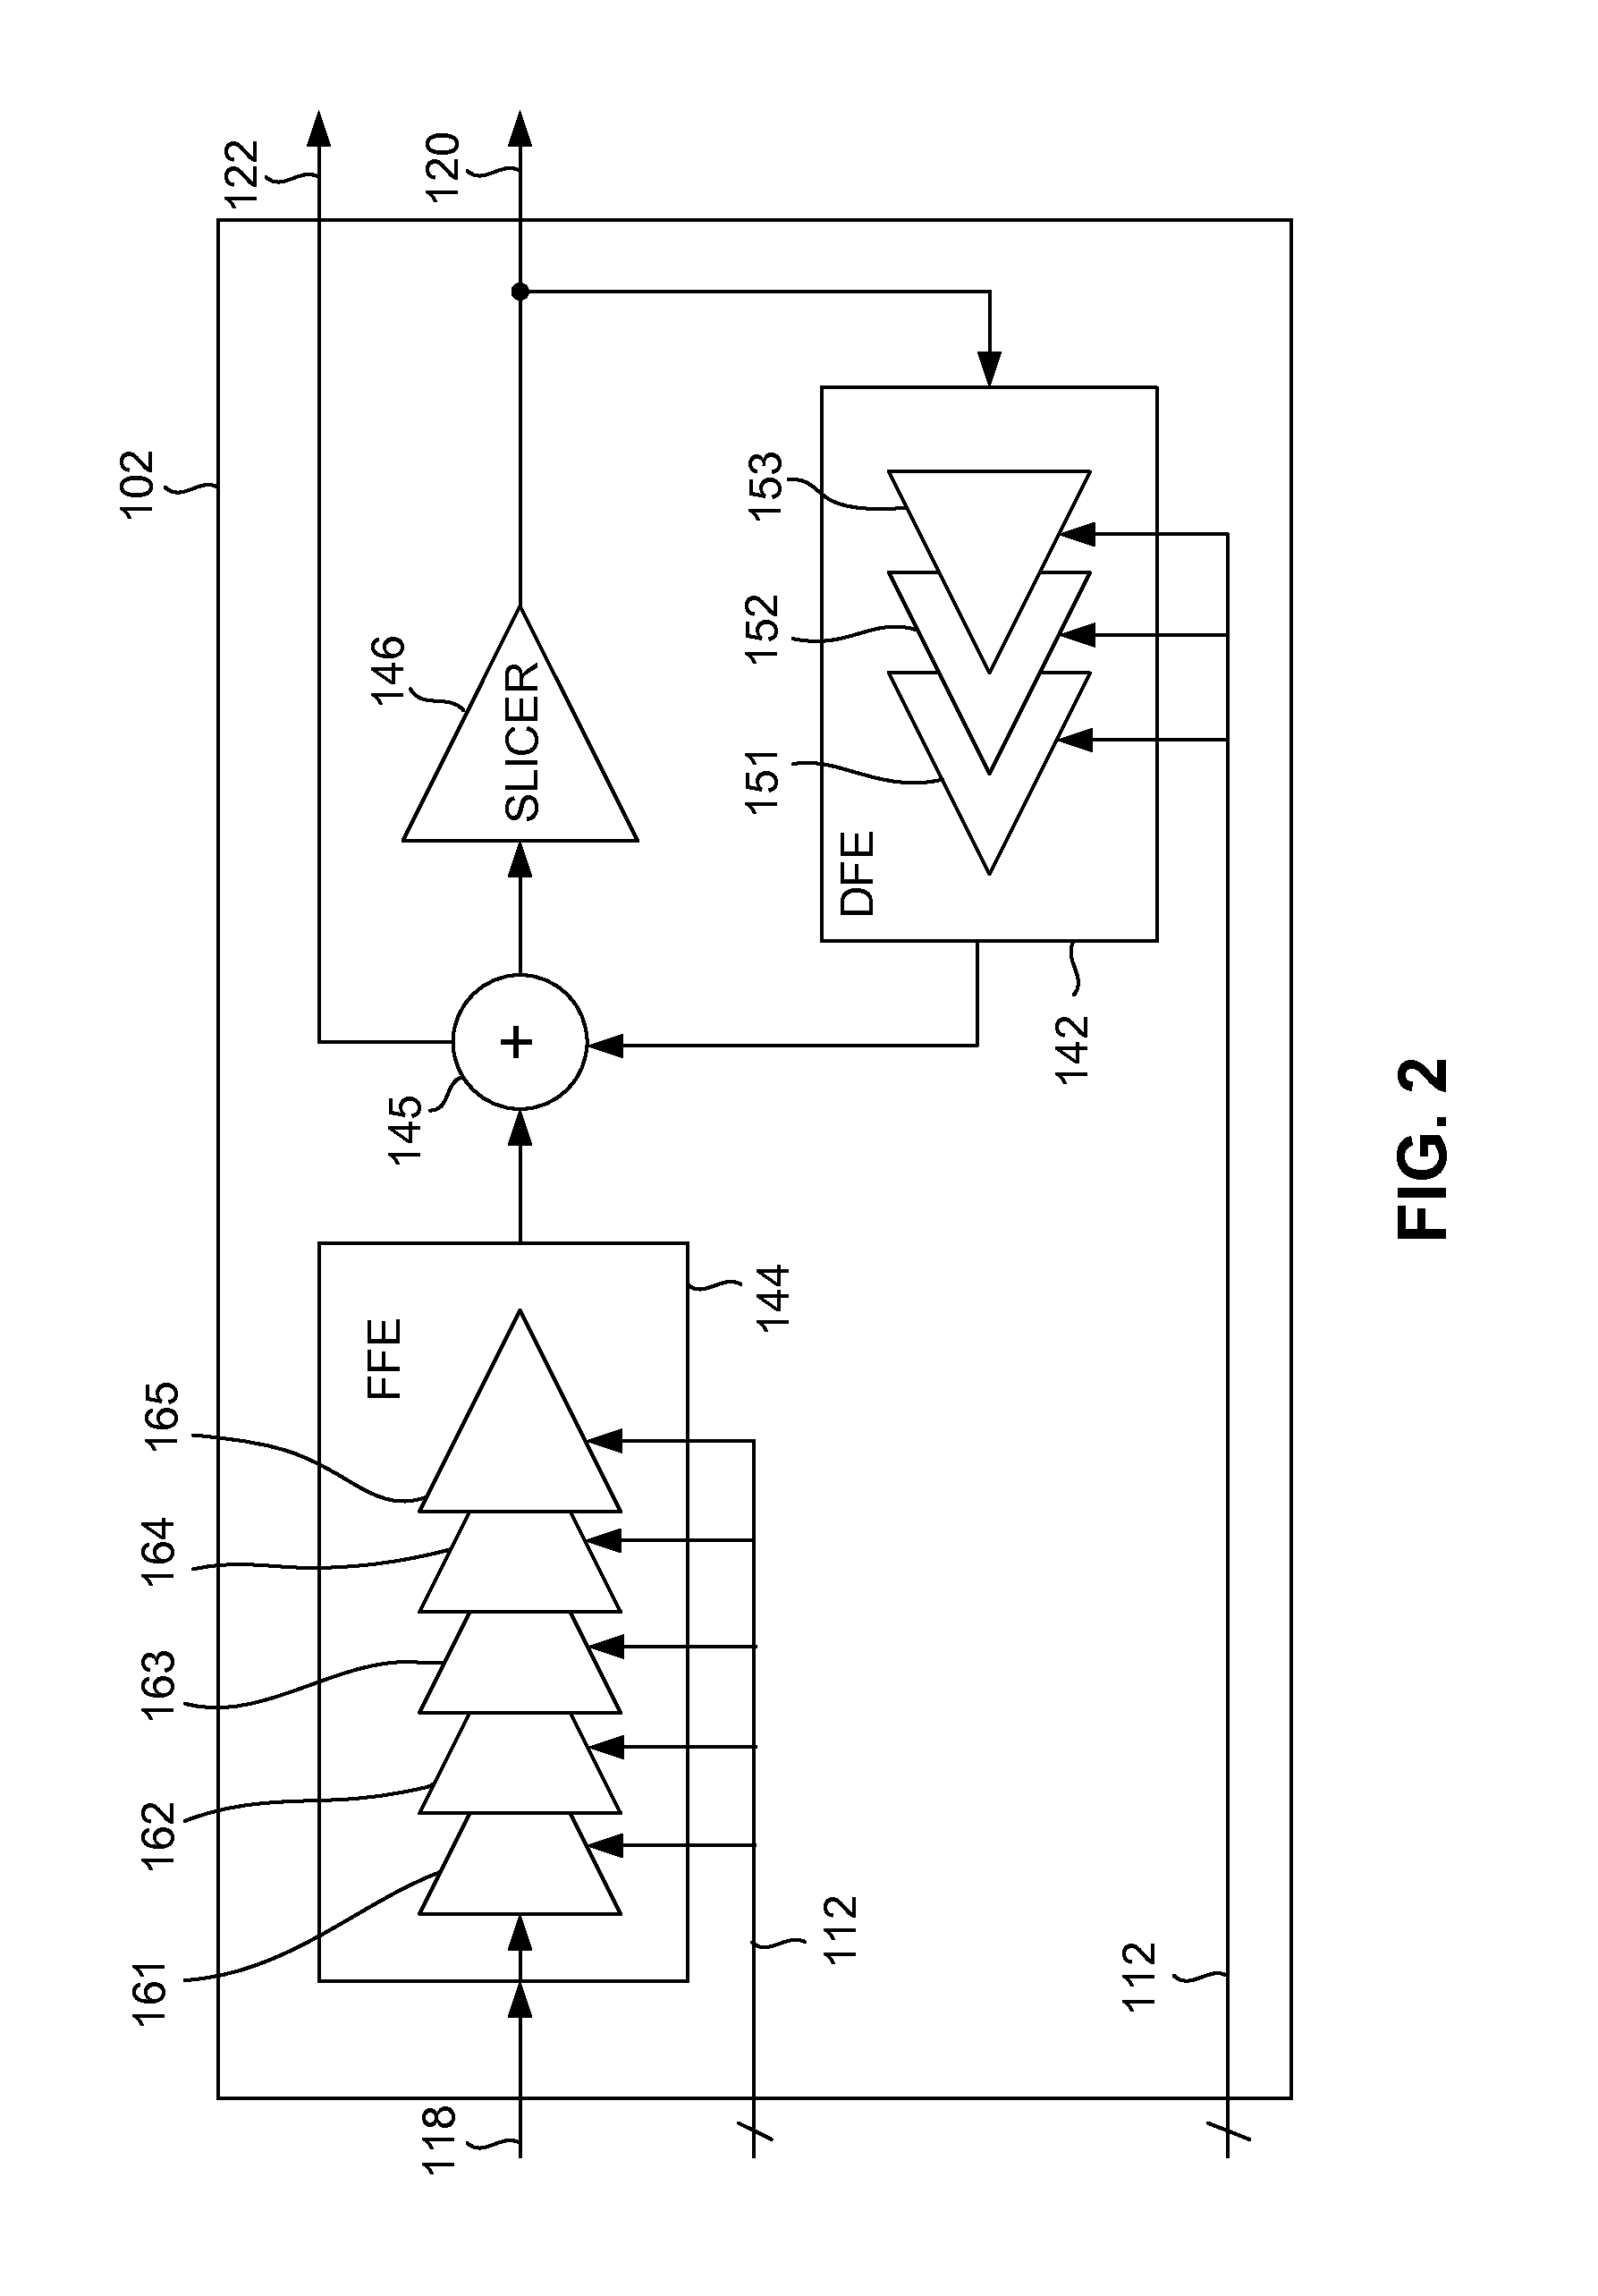 Rate-adaptive equalizer that automatically initializes itself based on detected channel conditions, and a method